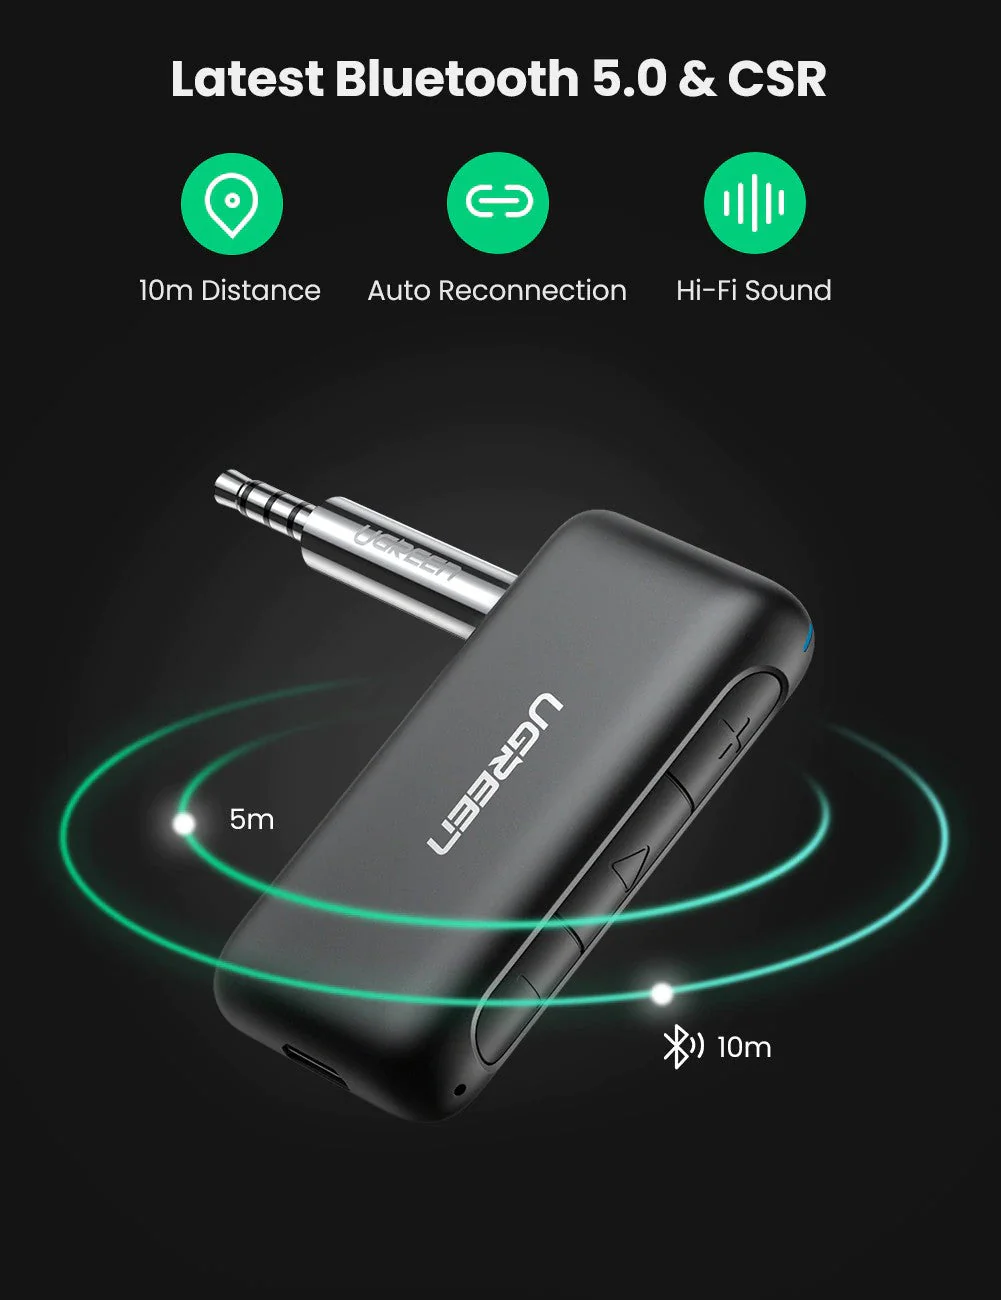  UGREEN Bluetooth 5.0 Transmitter Compatible for